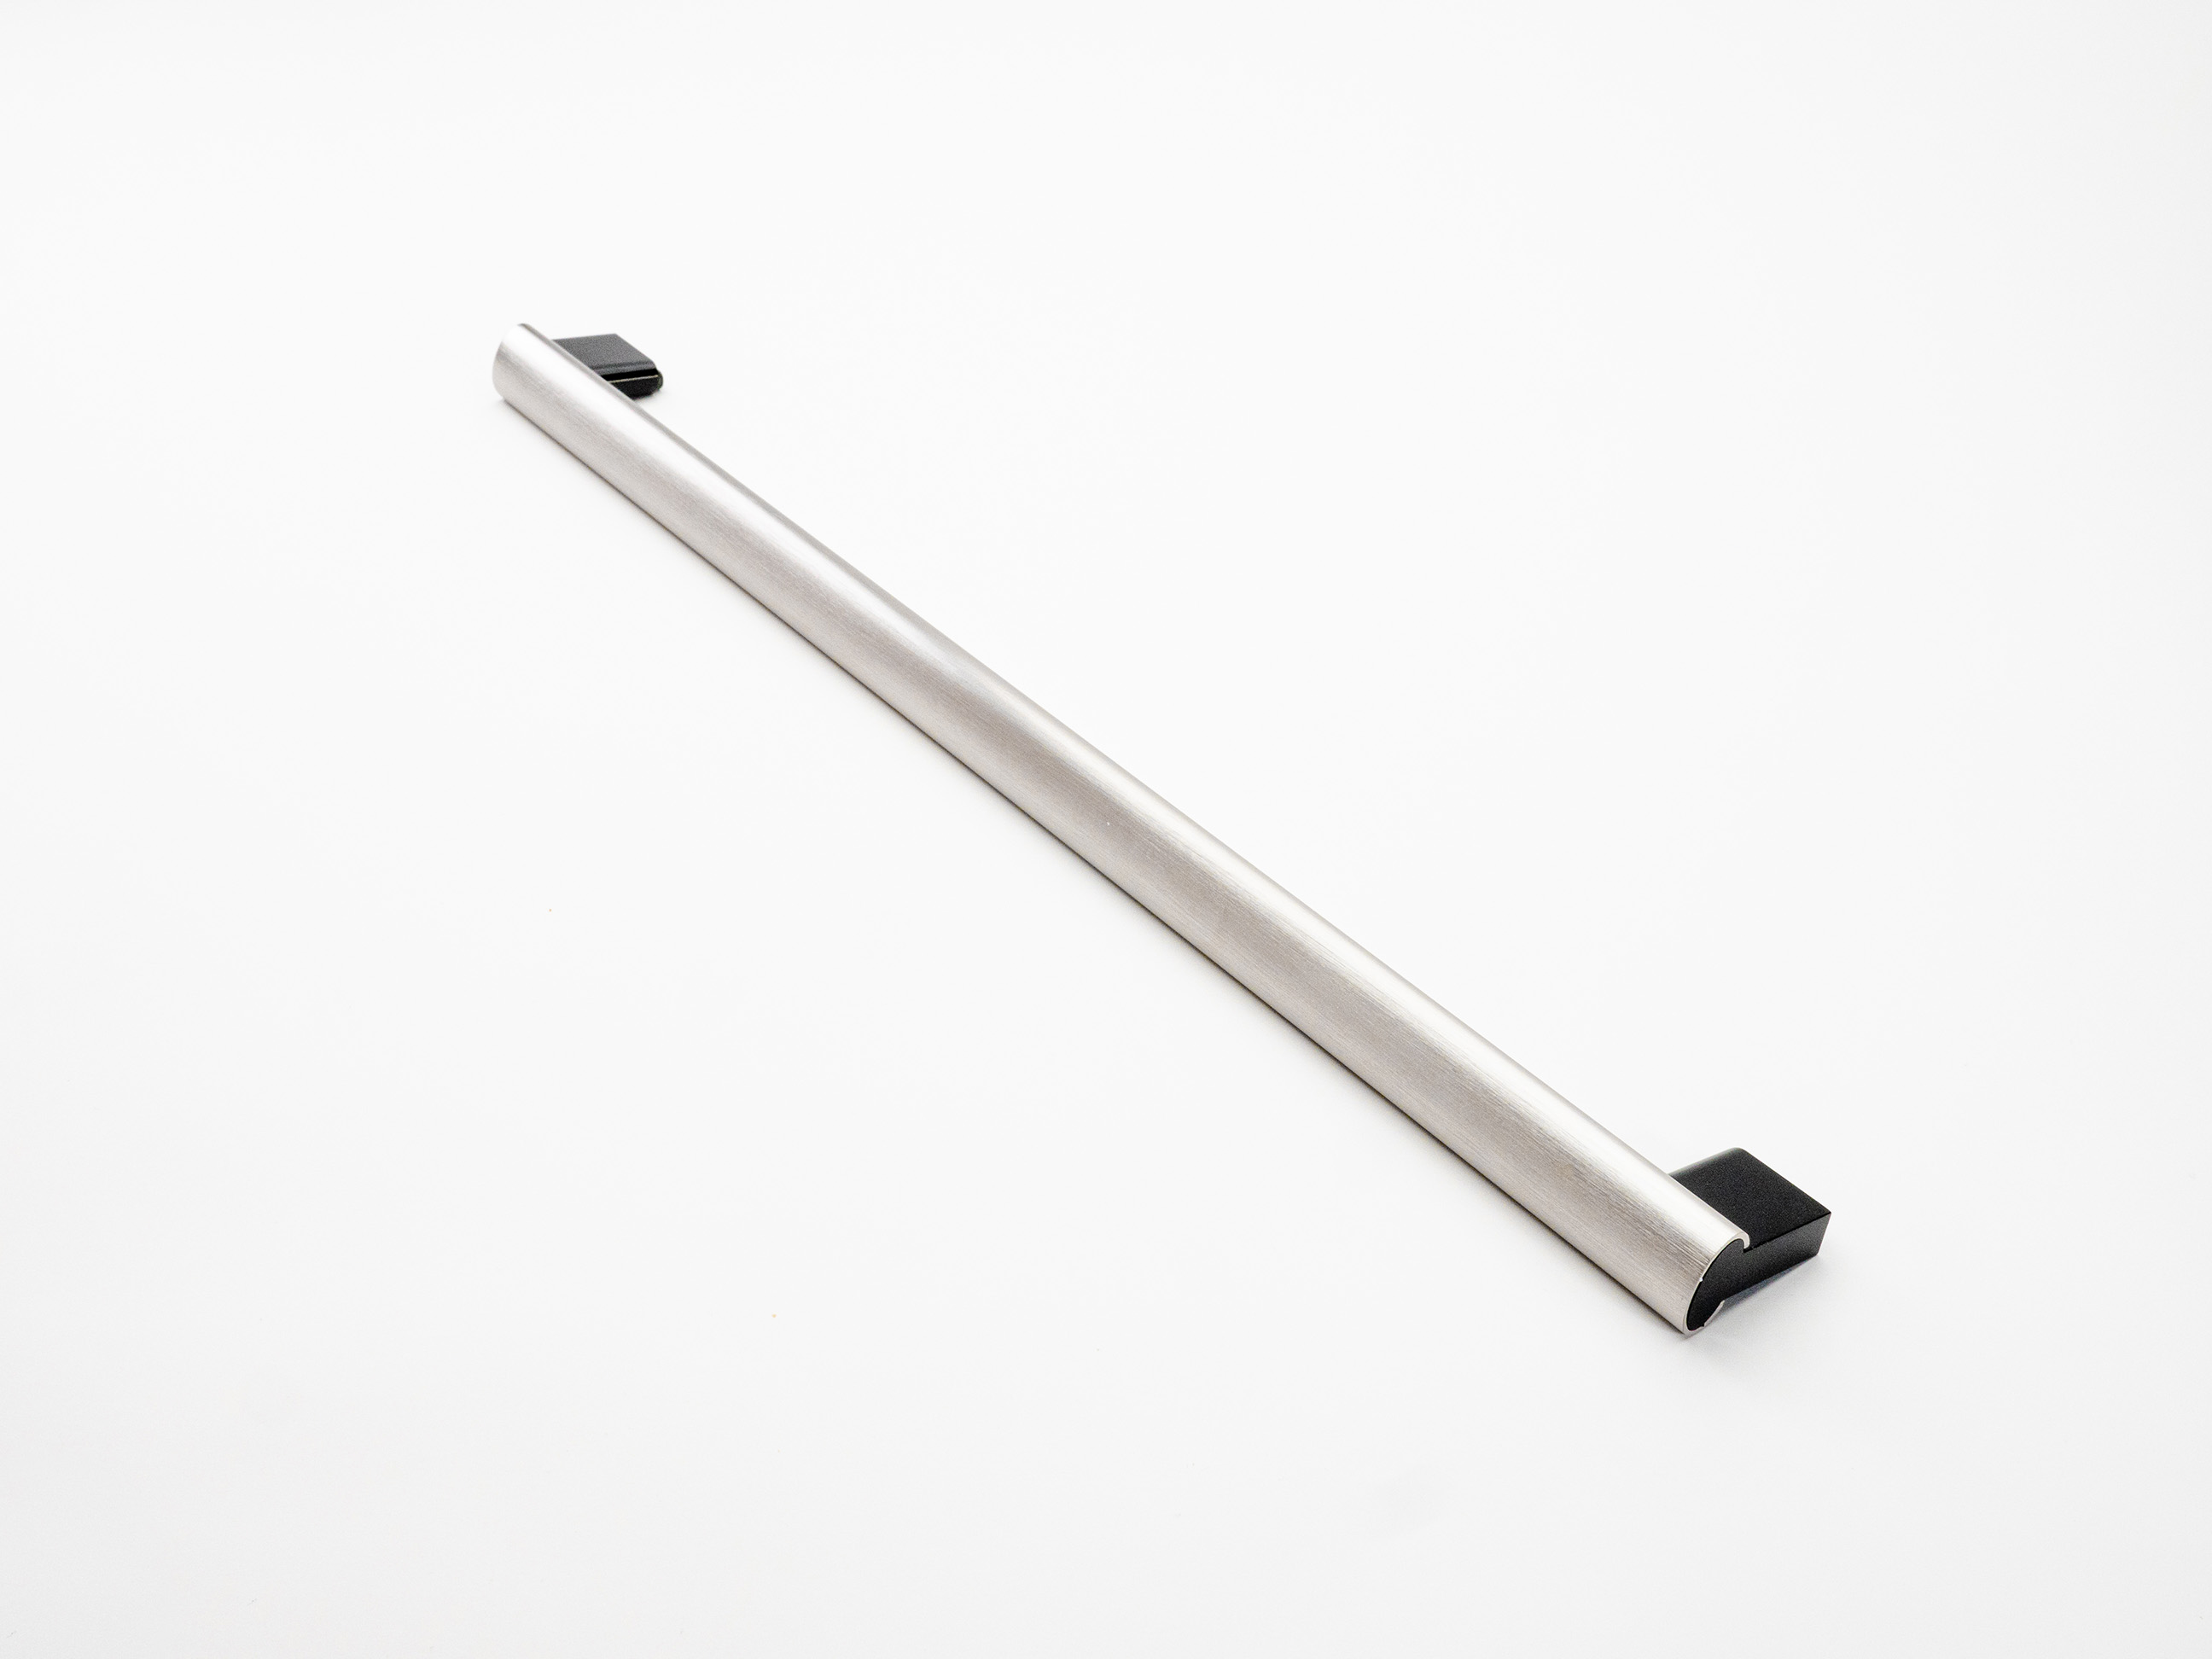 3-Piece Tubular Oven Handle - from stainless steel Anodized brushed extruded aluminium with PBT terminals